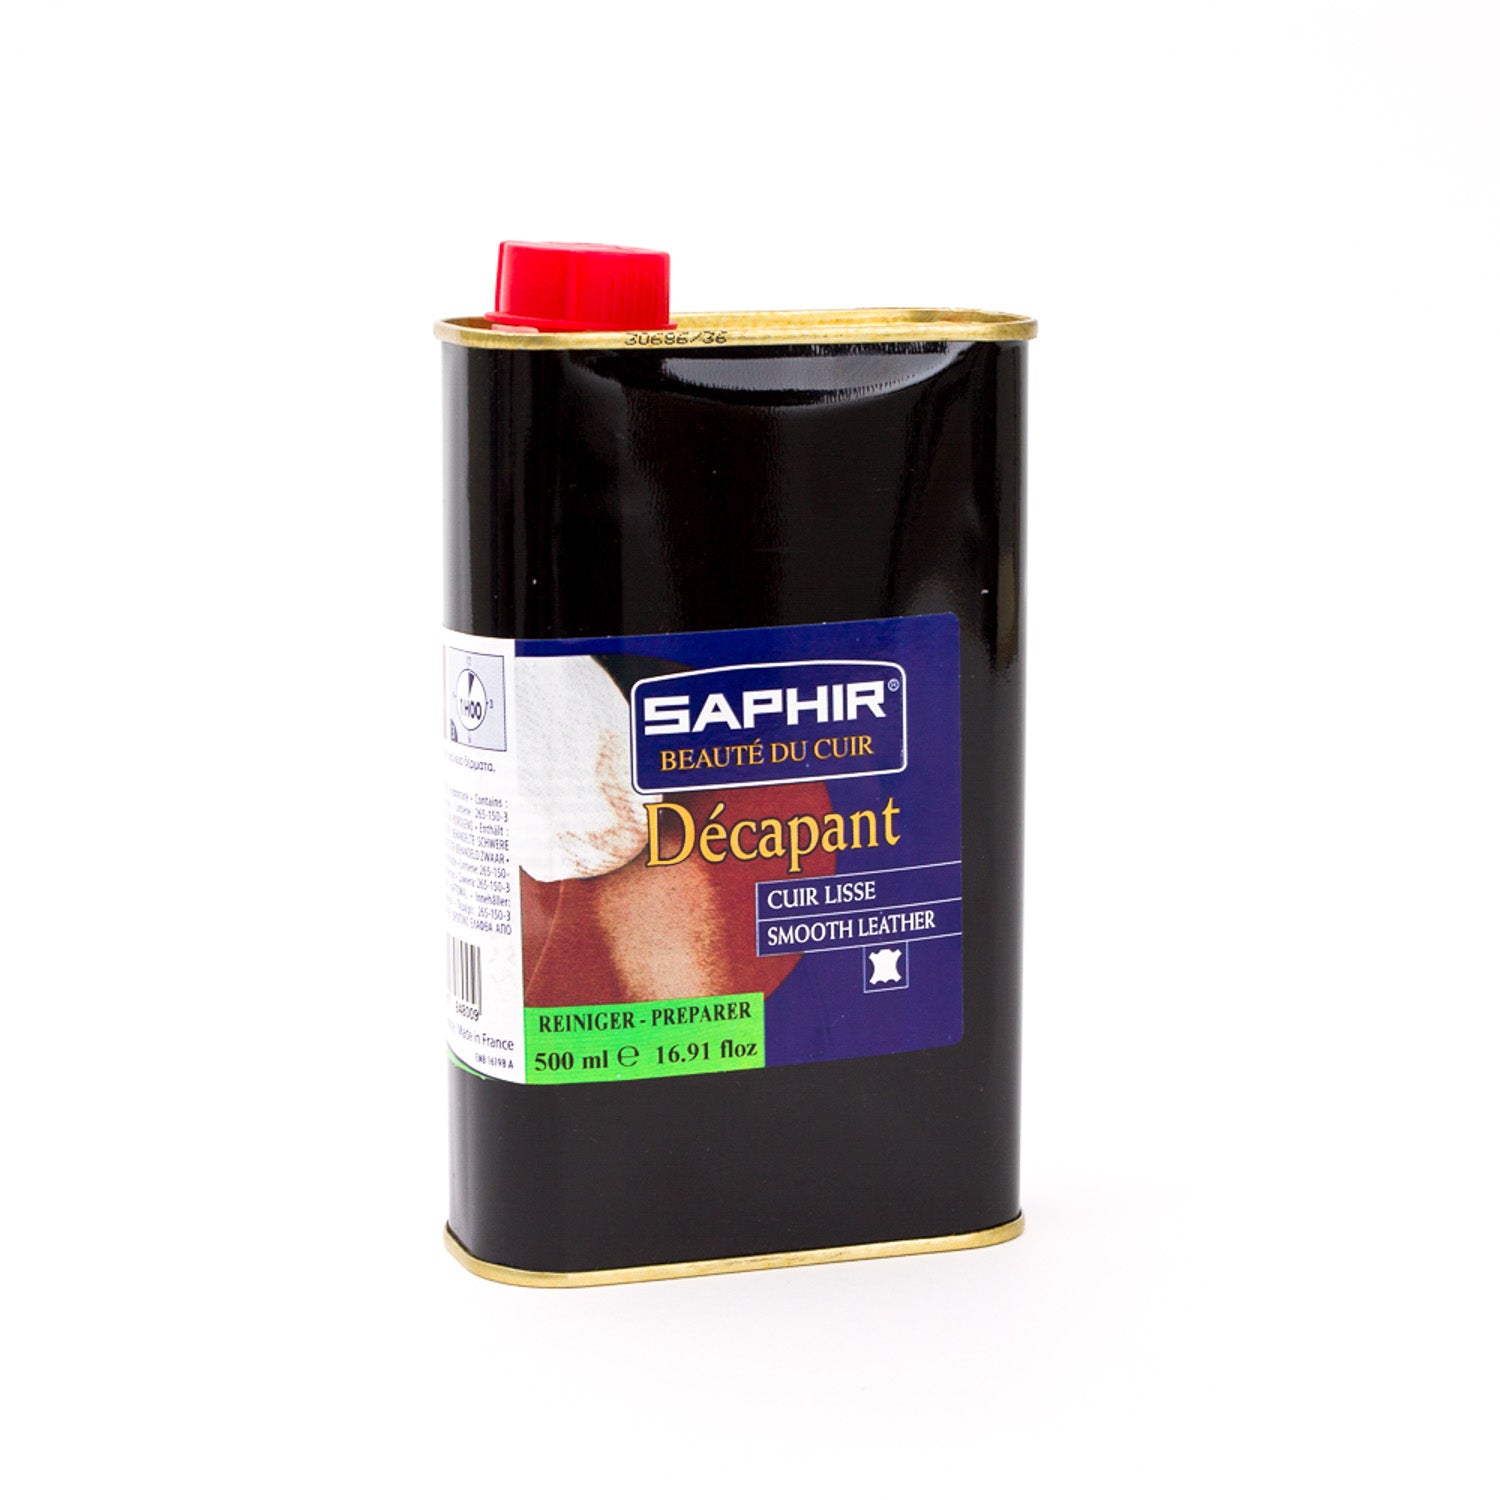 A bottle of Saphir Decapant Leather Stripper from KirbyAllison.com, used in the dyeing process for smooth leather, showcased on a white background.